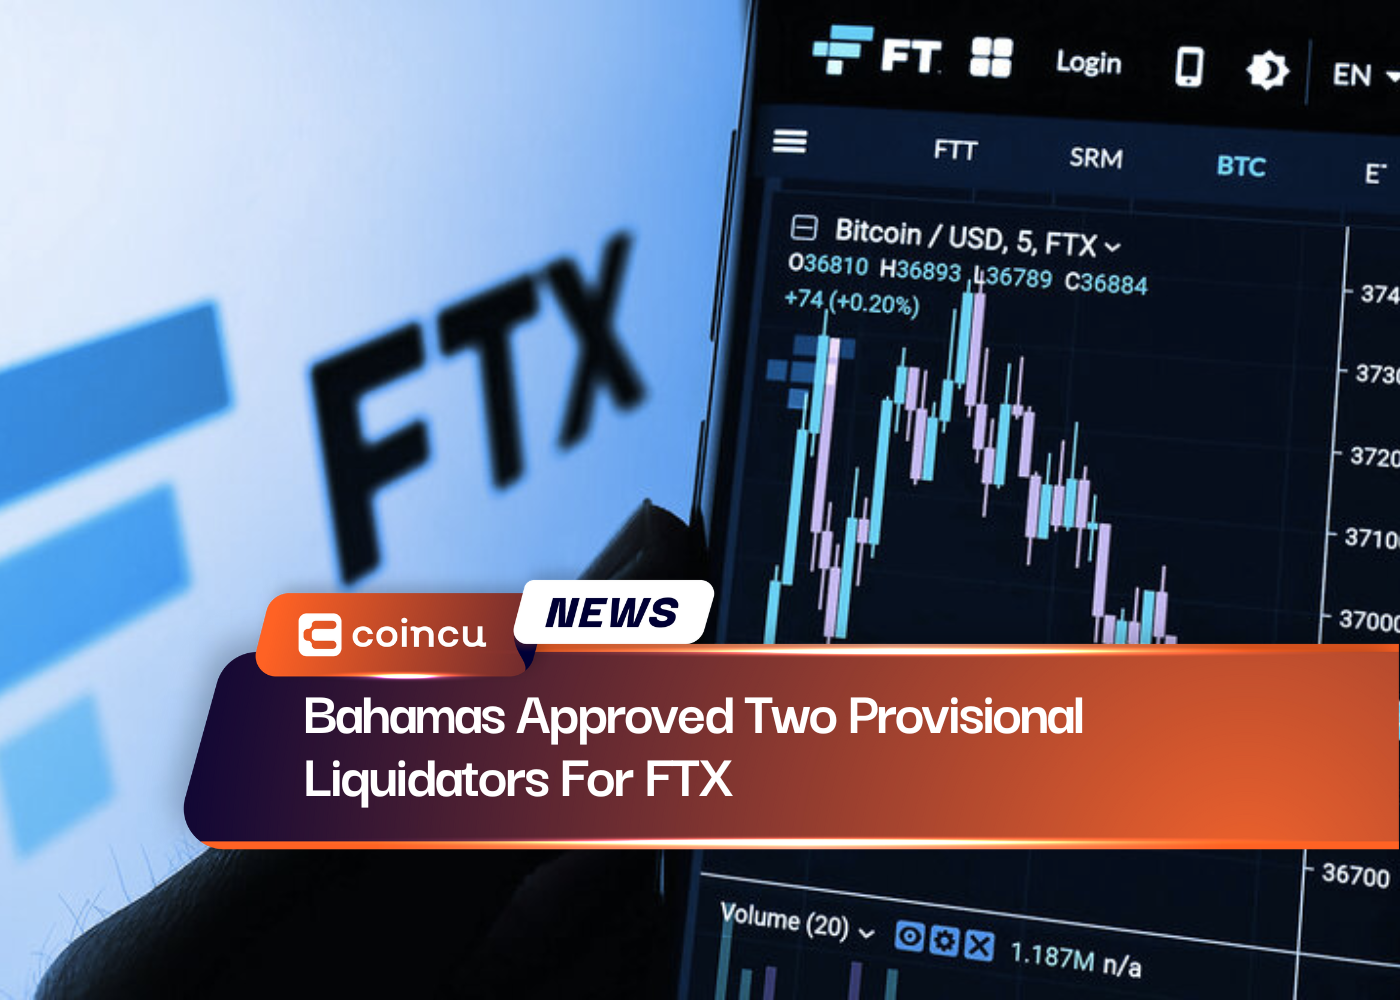 Bahamas Approved Two Provisional Liquidators For FTX